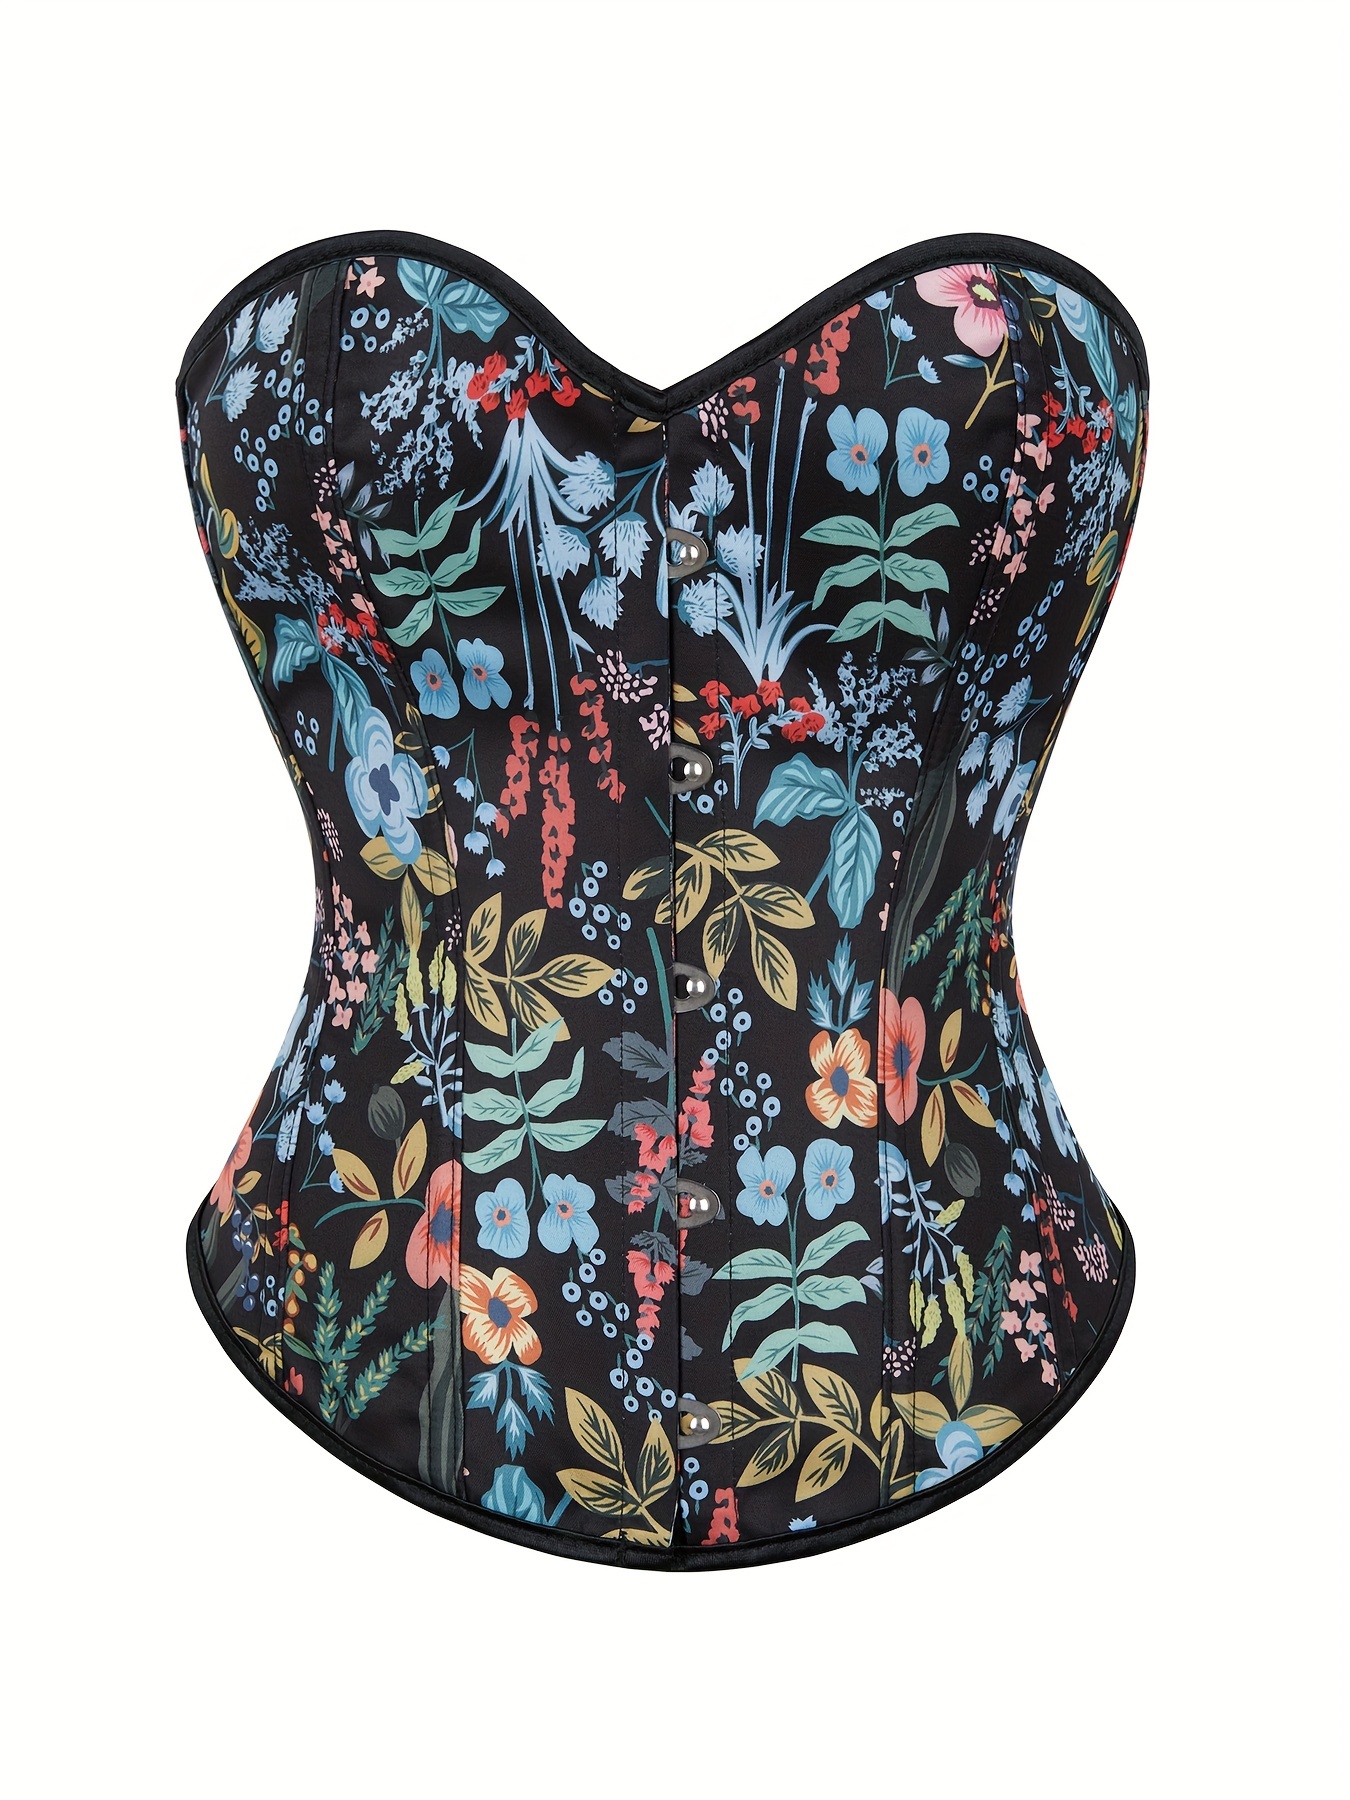 womens vintage floral print corset bustier strapless waist cincher boned bodice with ribbon lace up back for party fashion